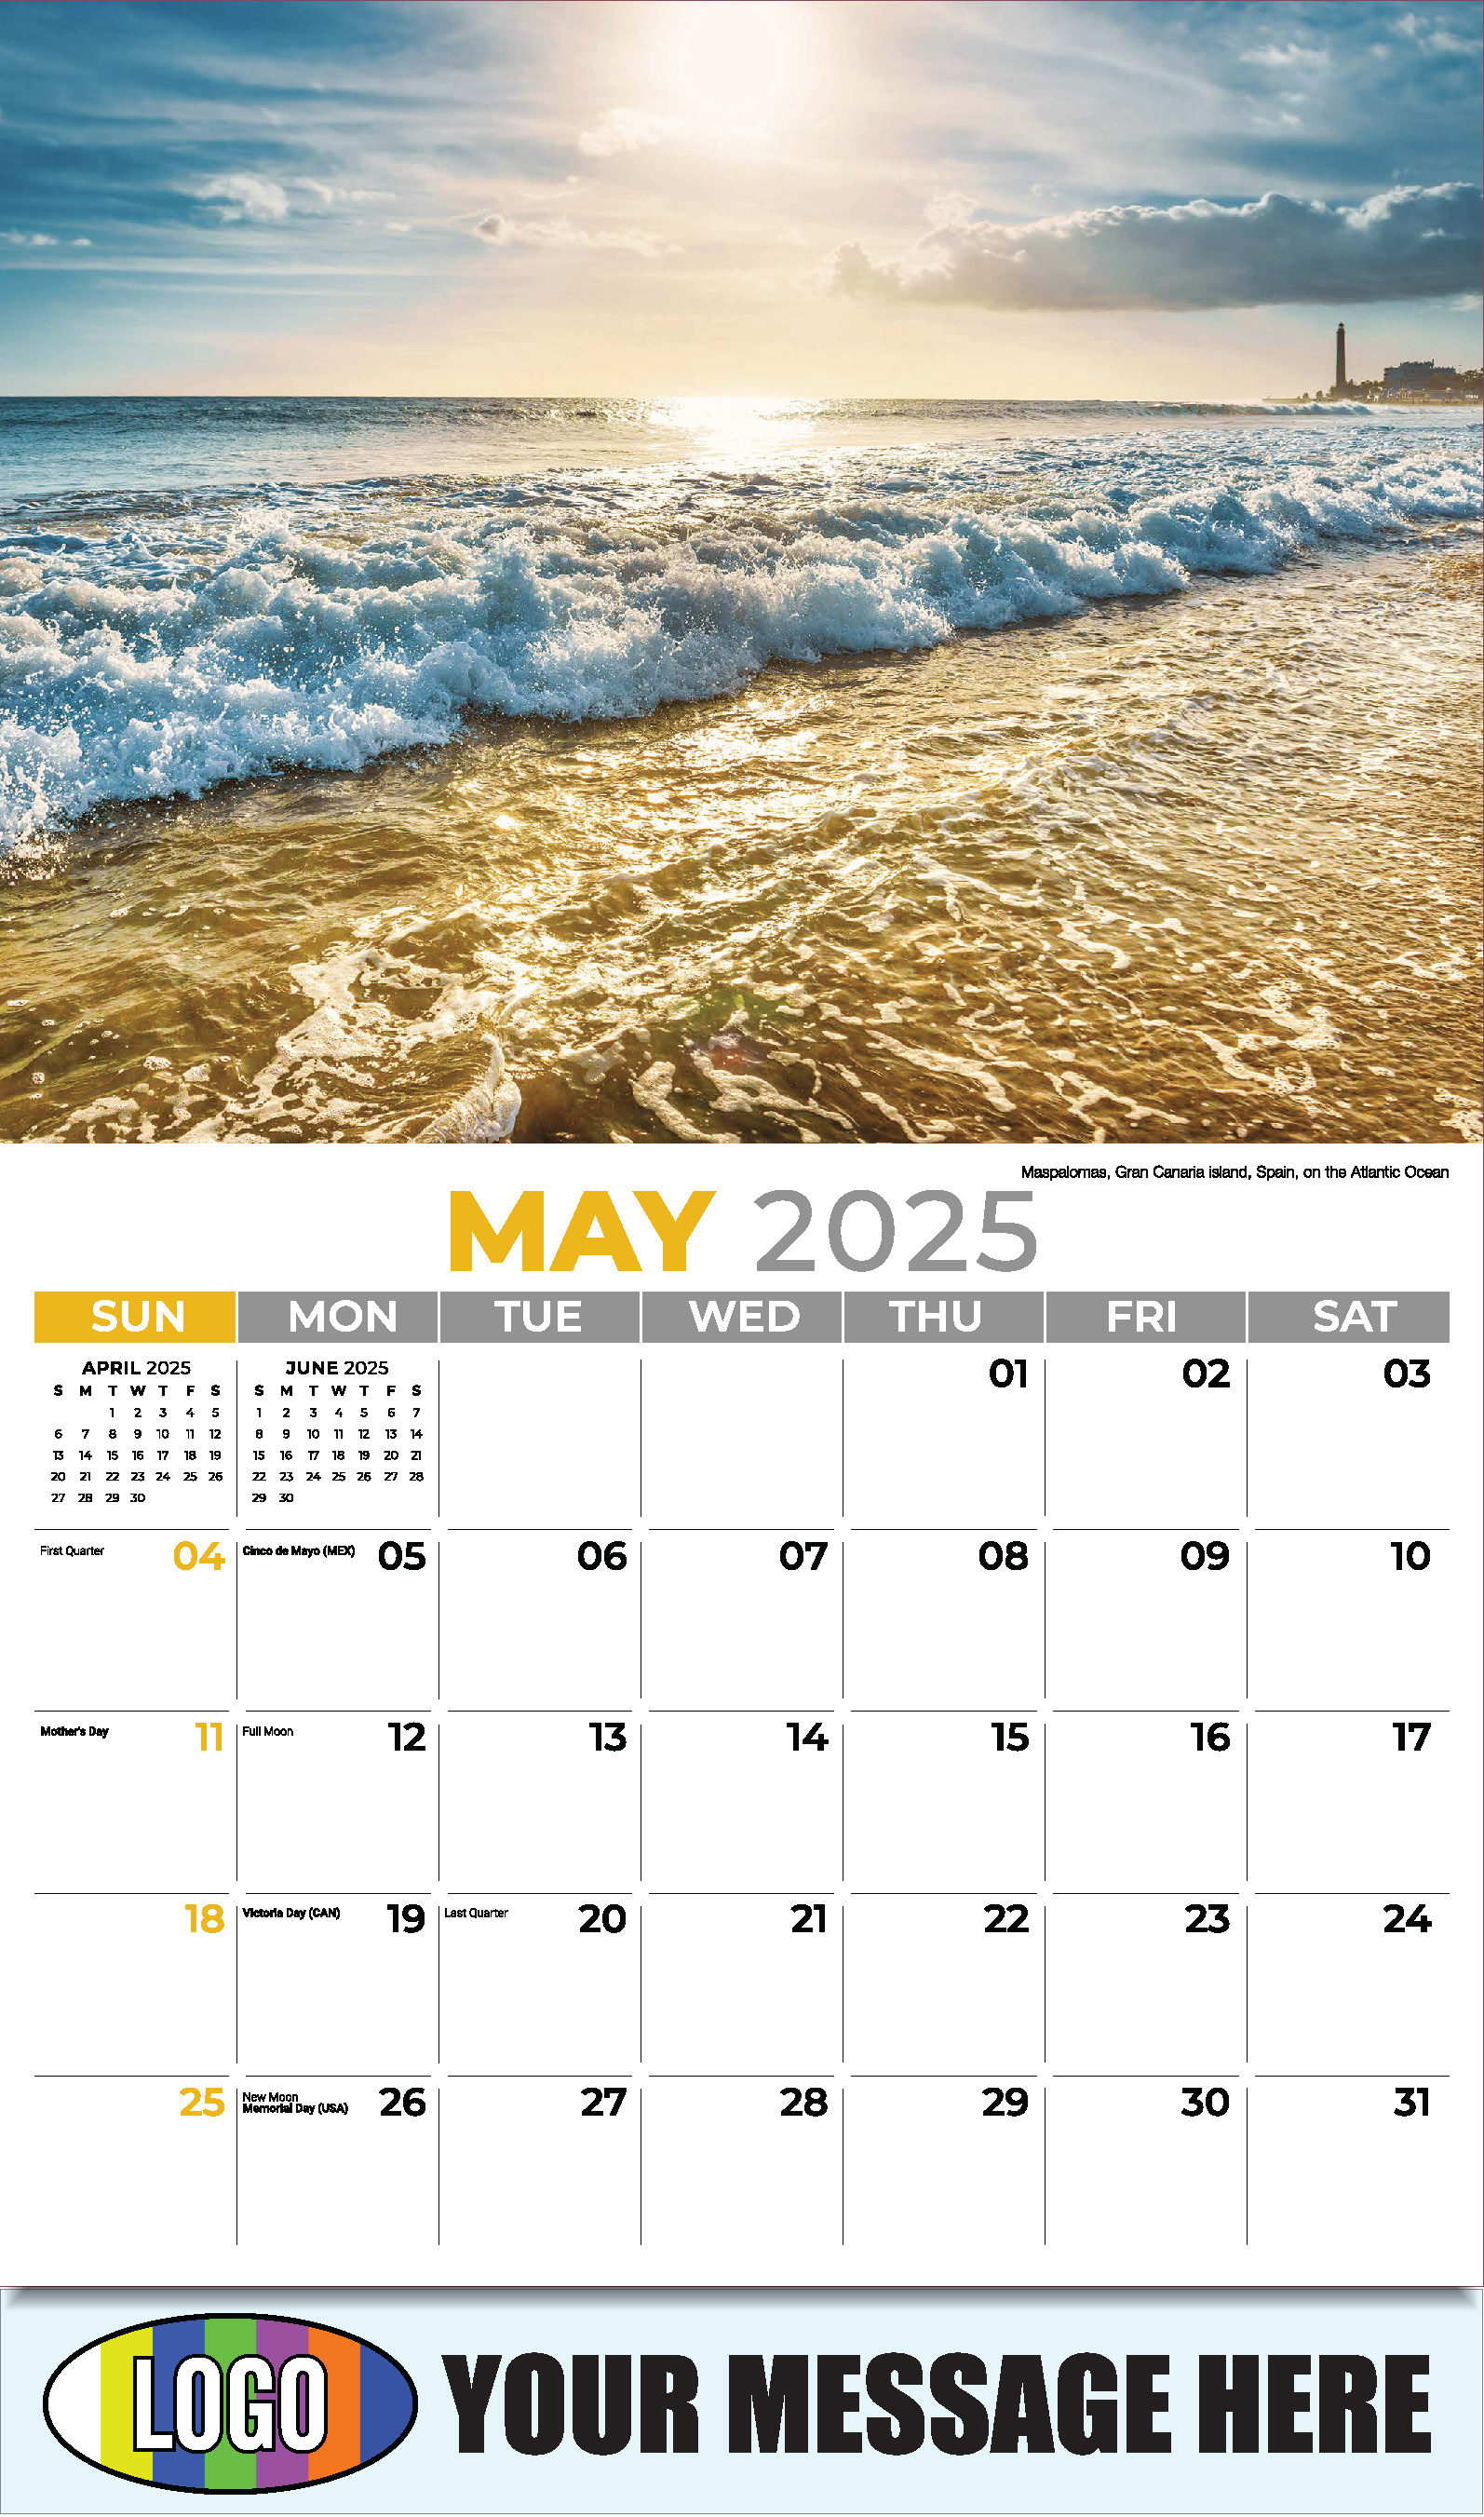 Sun, Sand and Surf 2025 Business Advertsing Wall Calendar - May